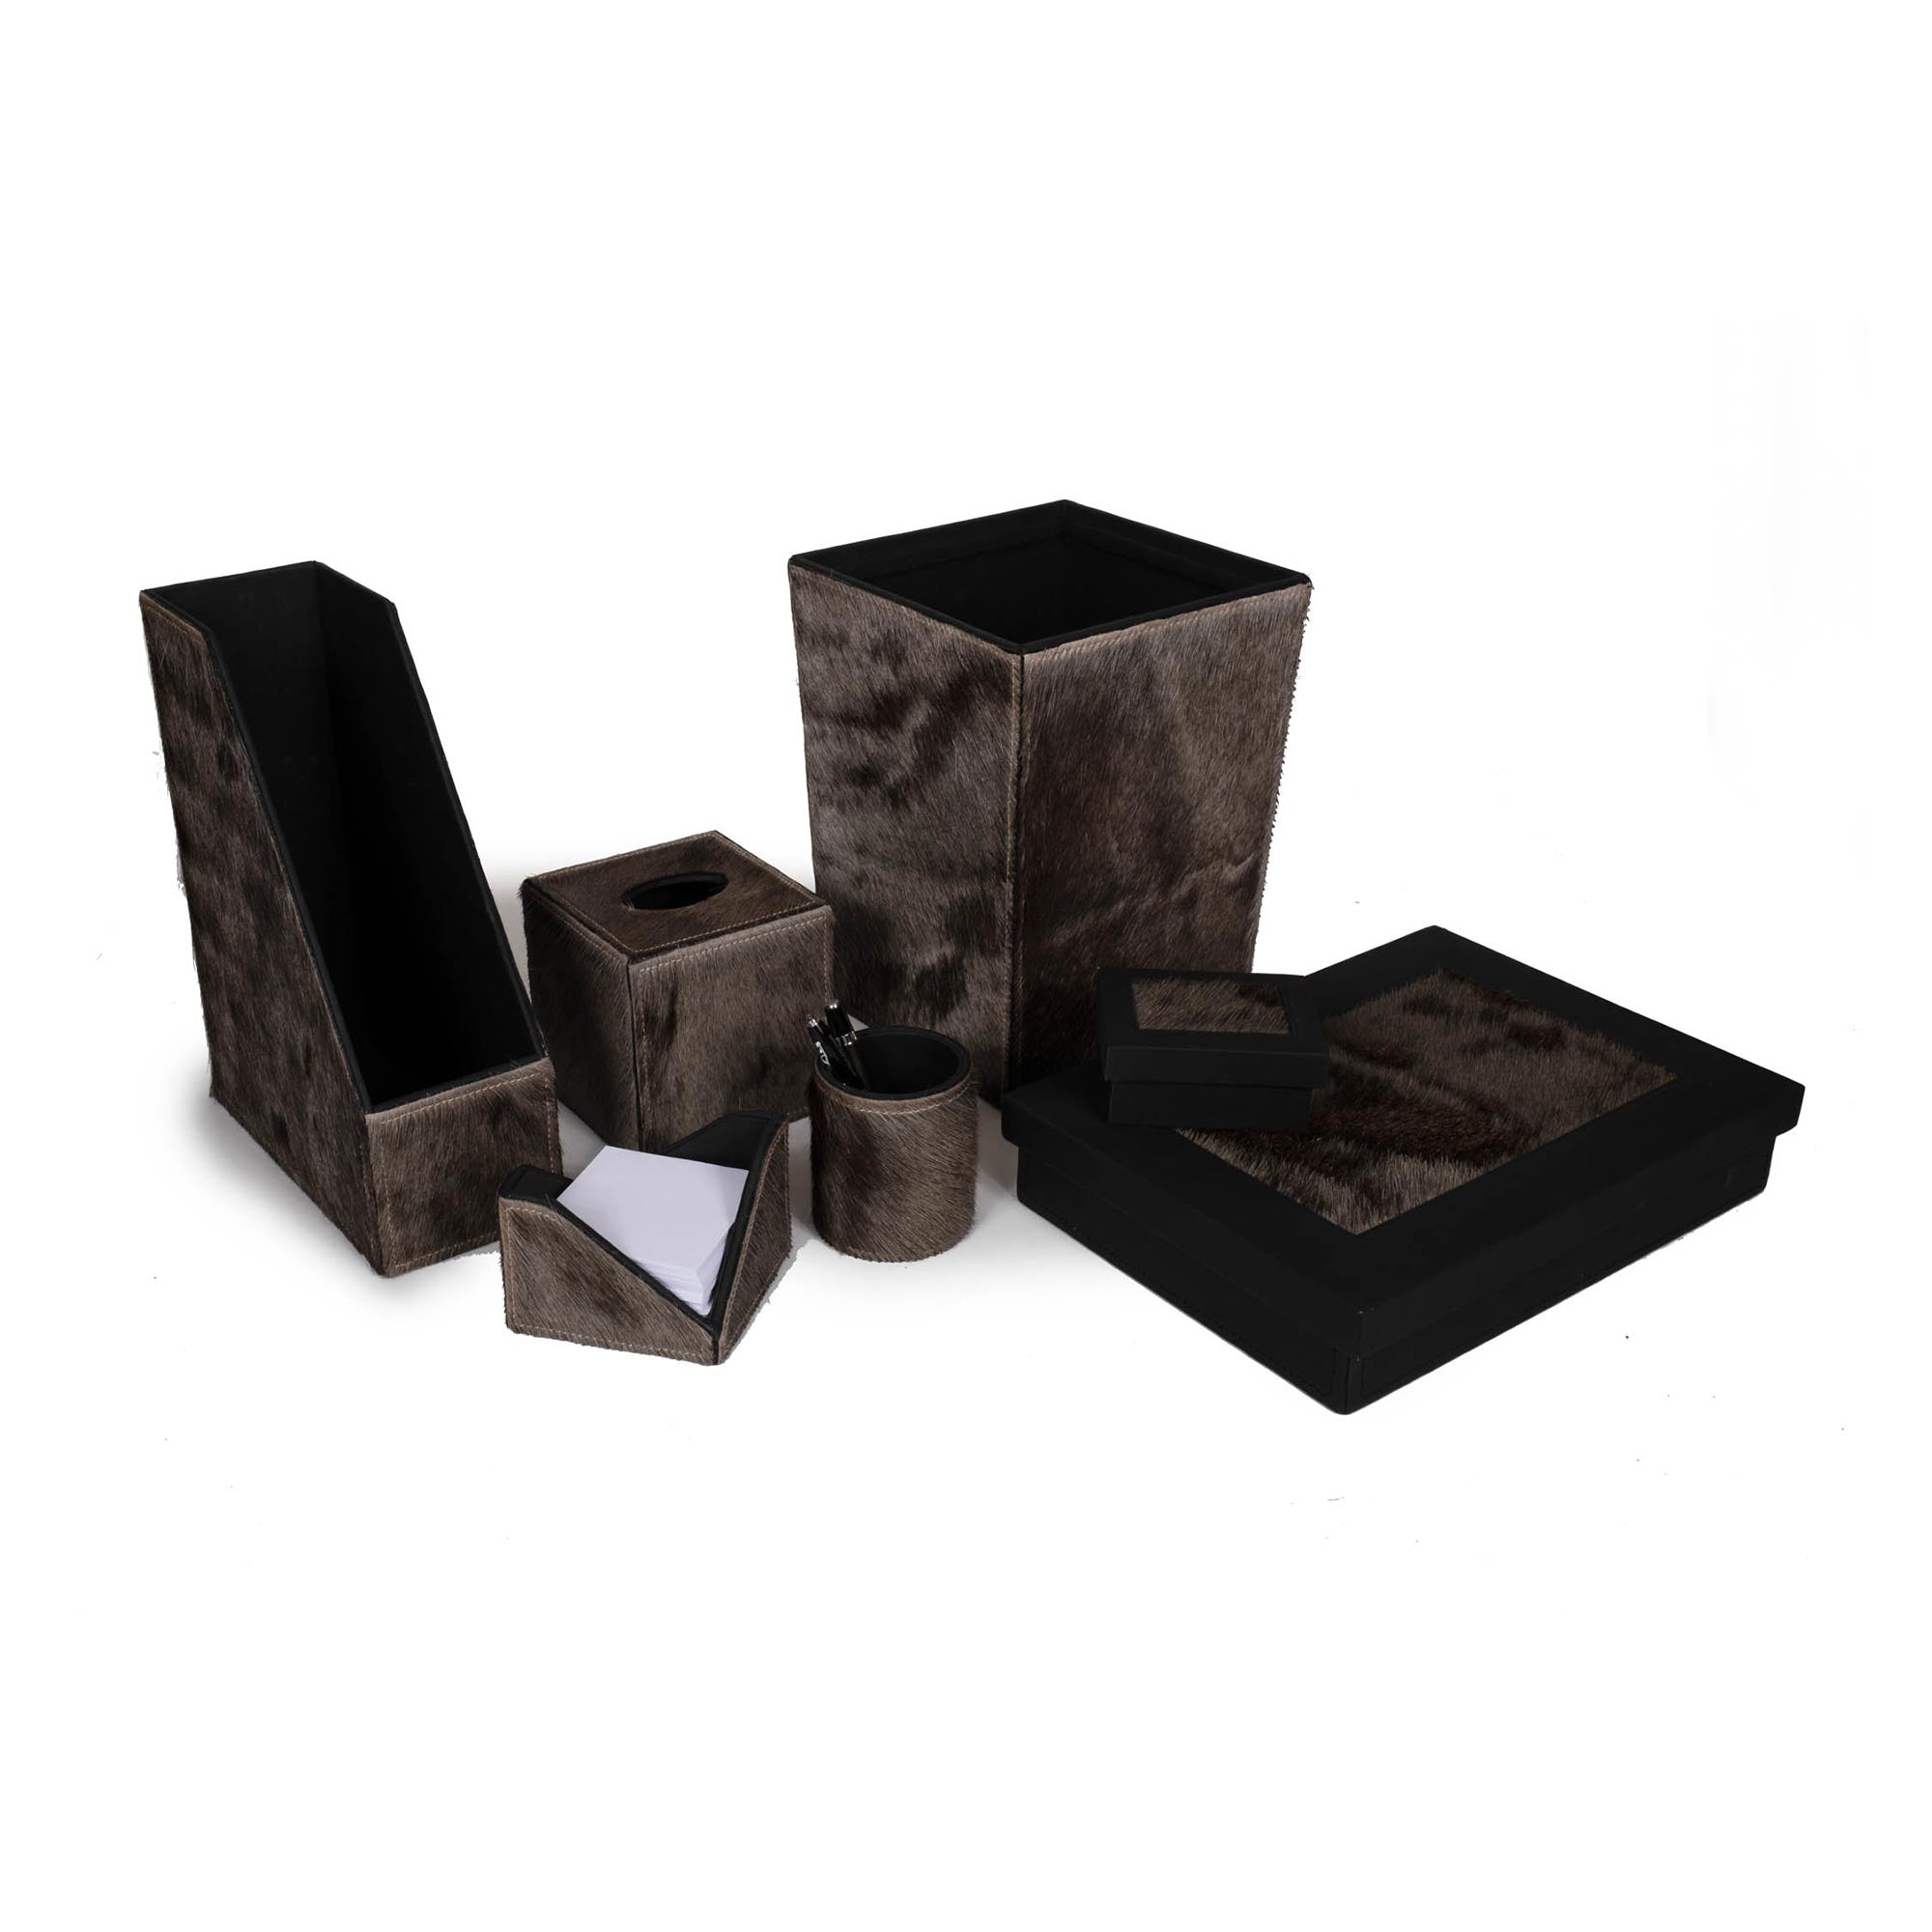 Playing Card Box - Wildebeest Hide